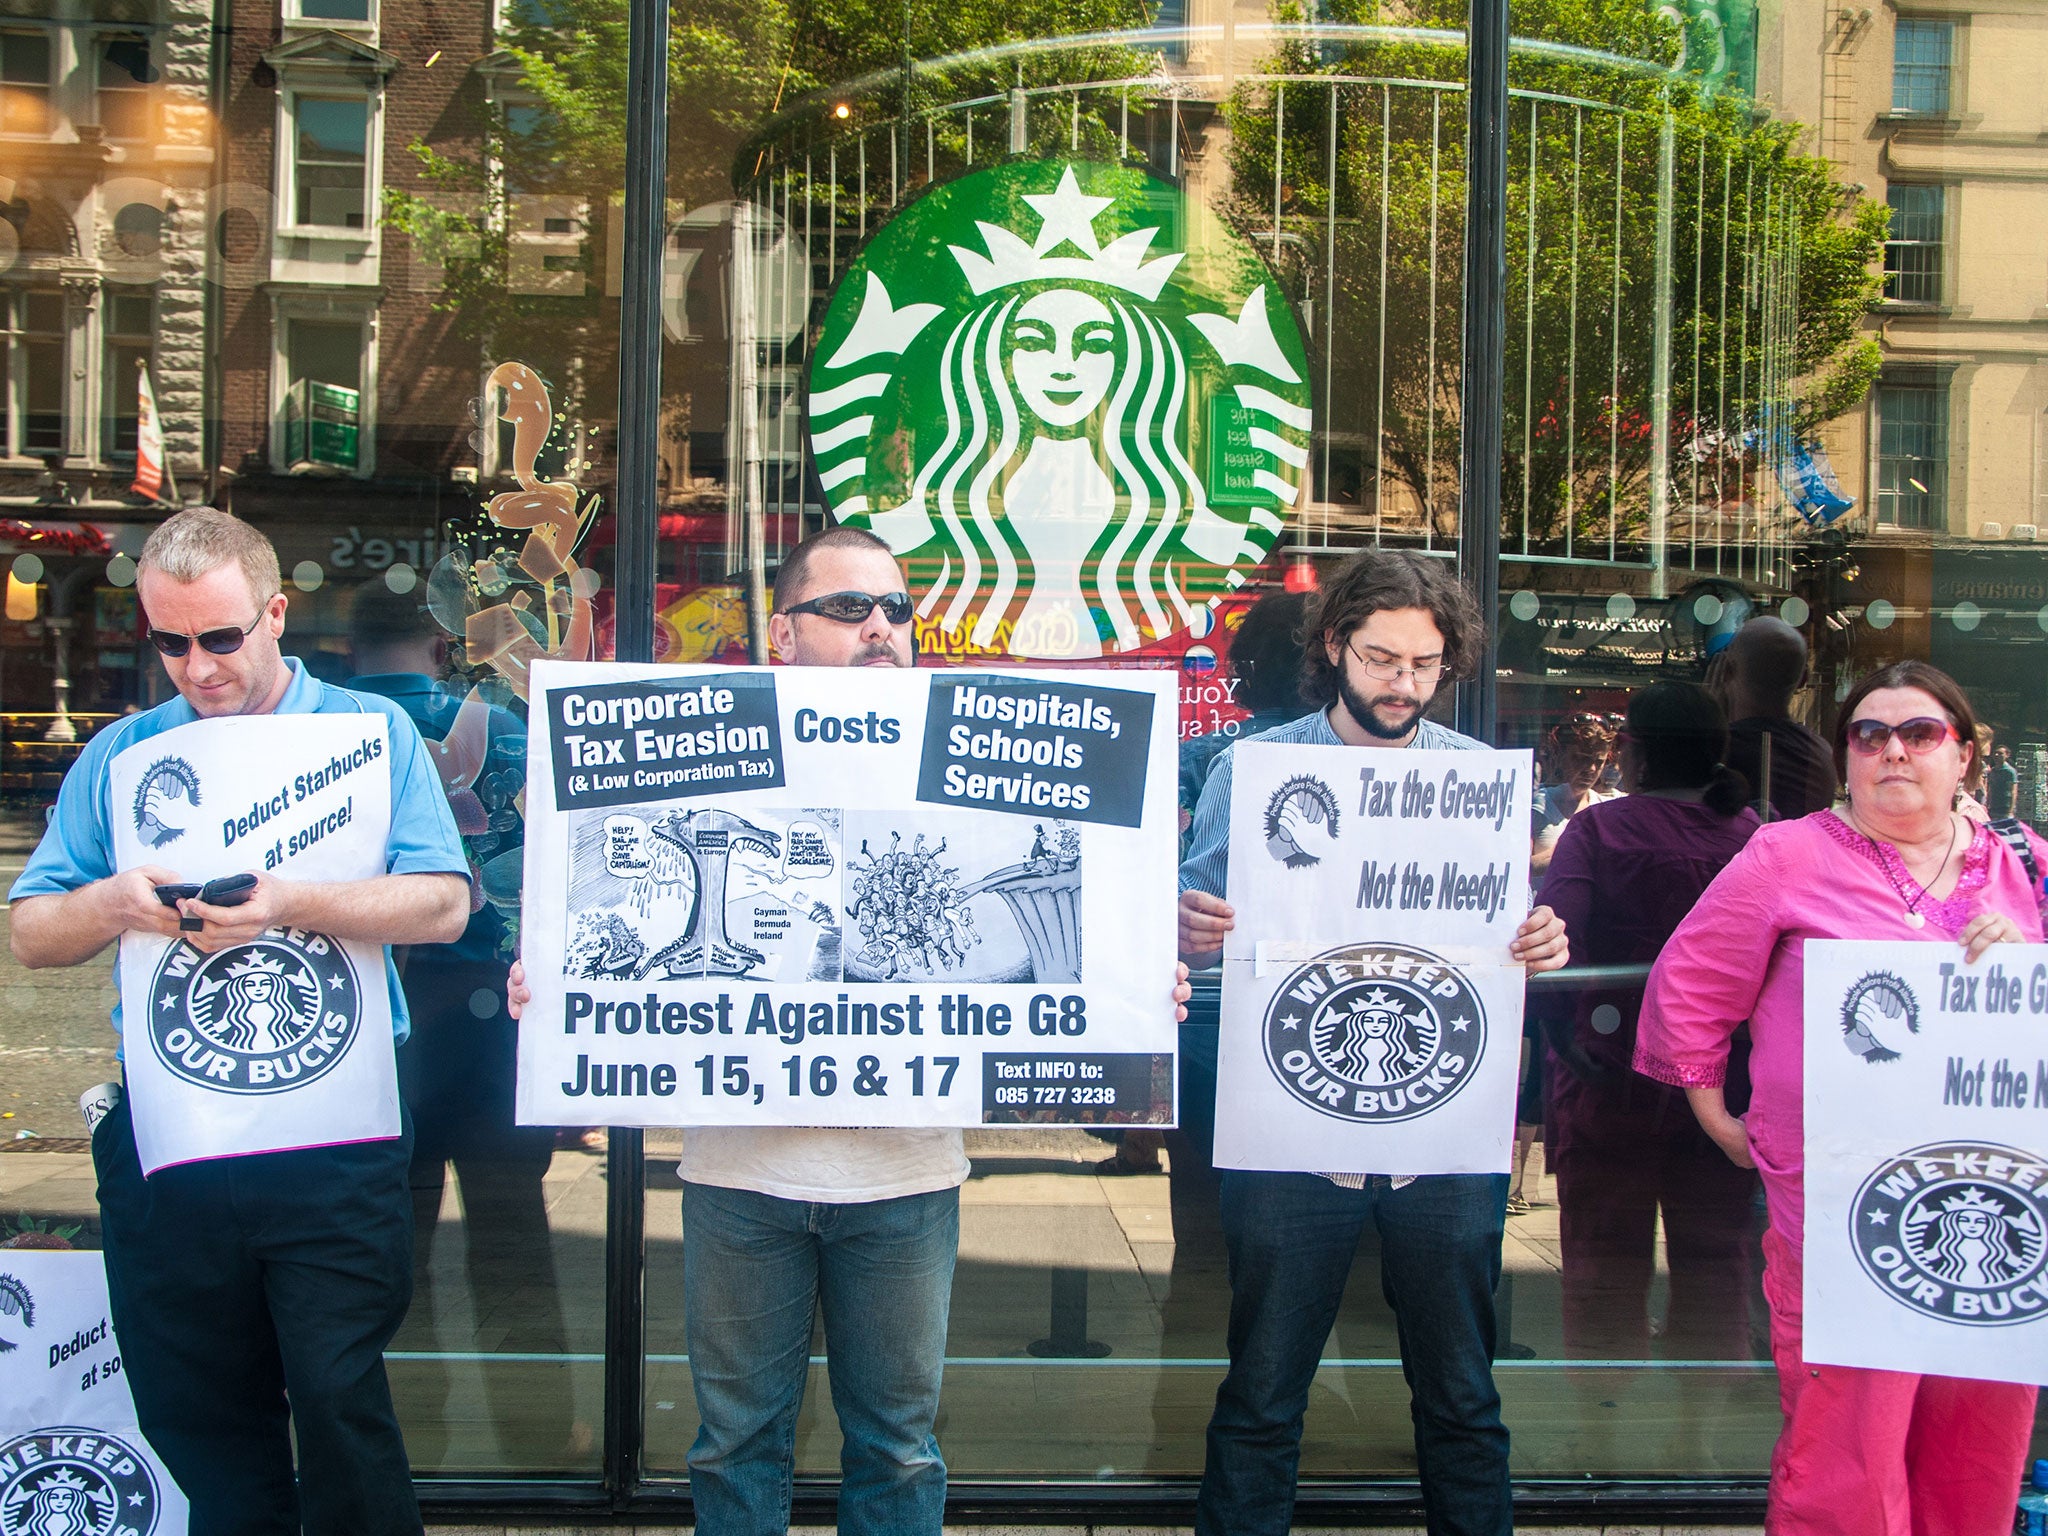 Protesters picket against corporate tax evasion in front of Starbucks on Westmoreland Street in Dublin